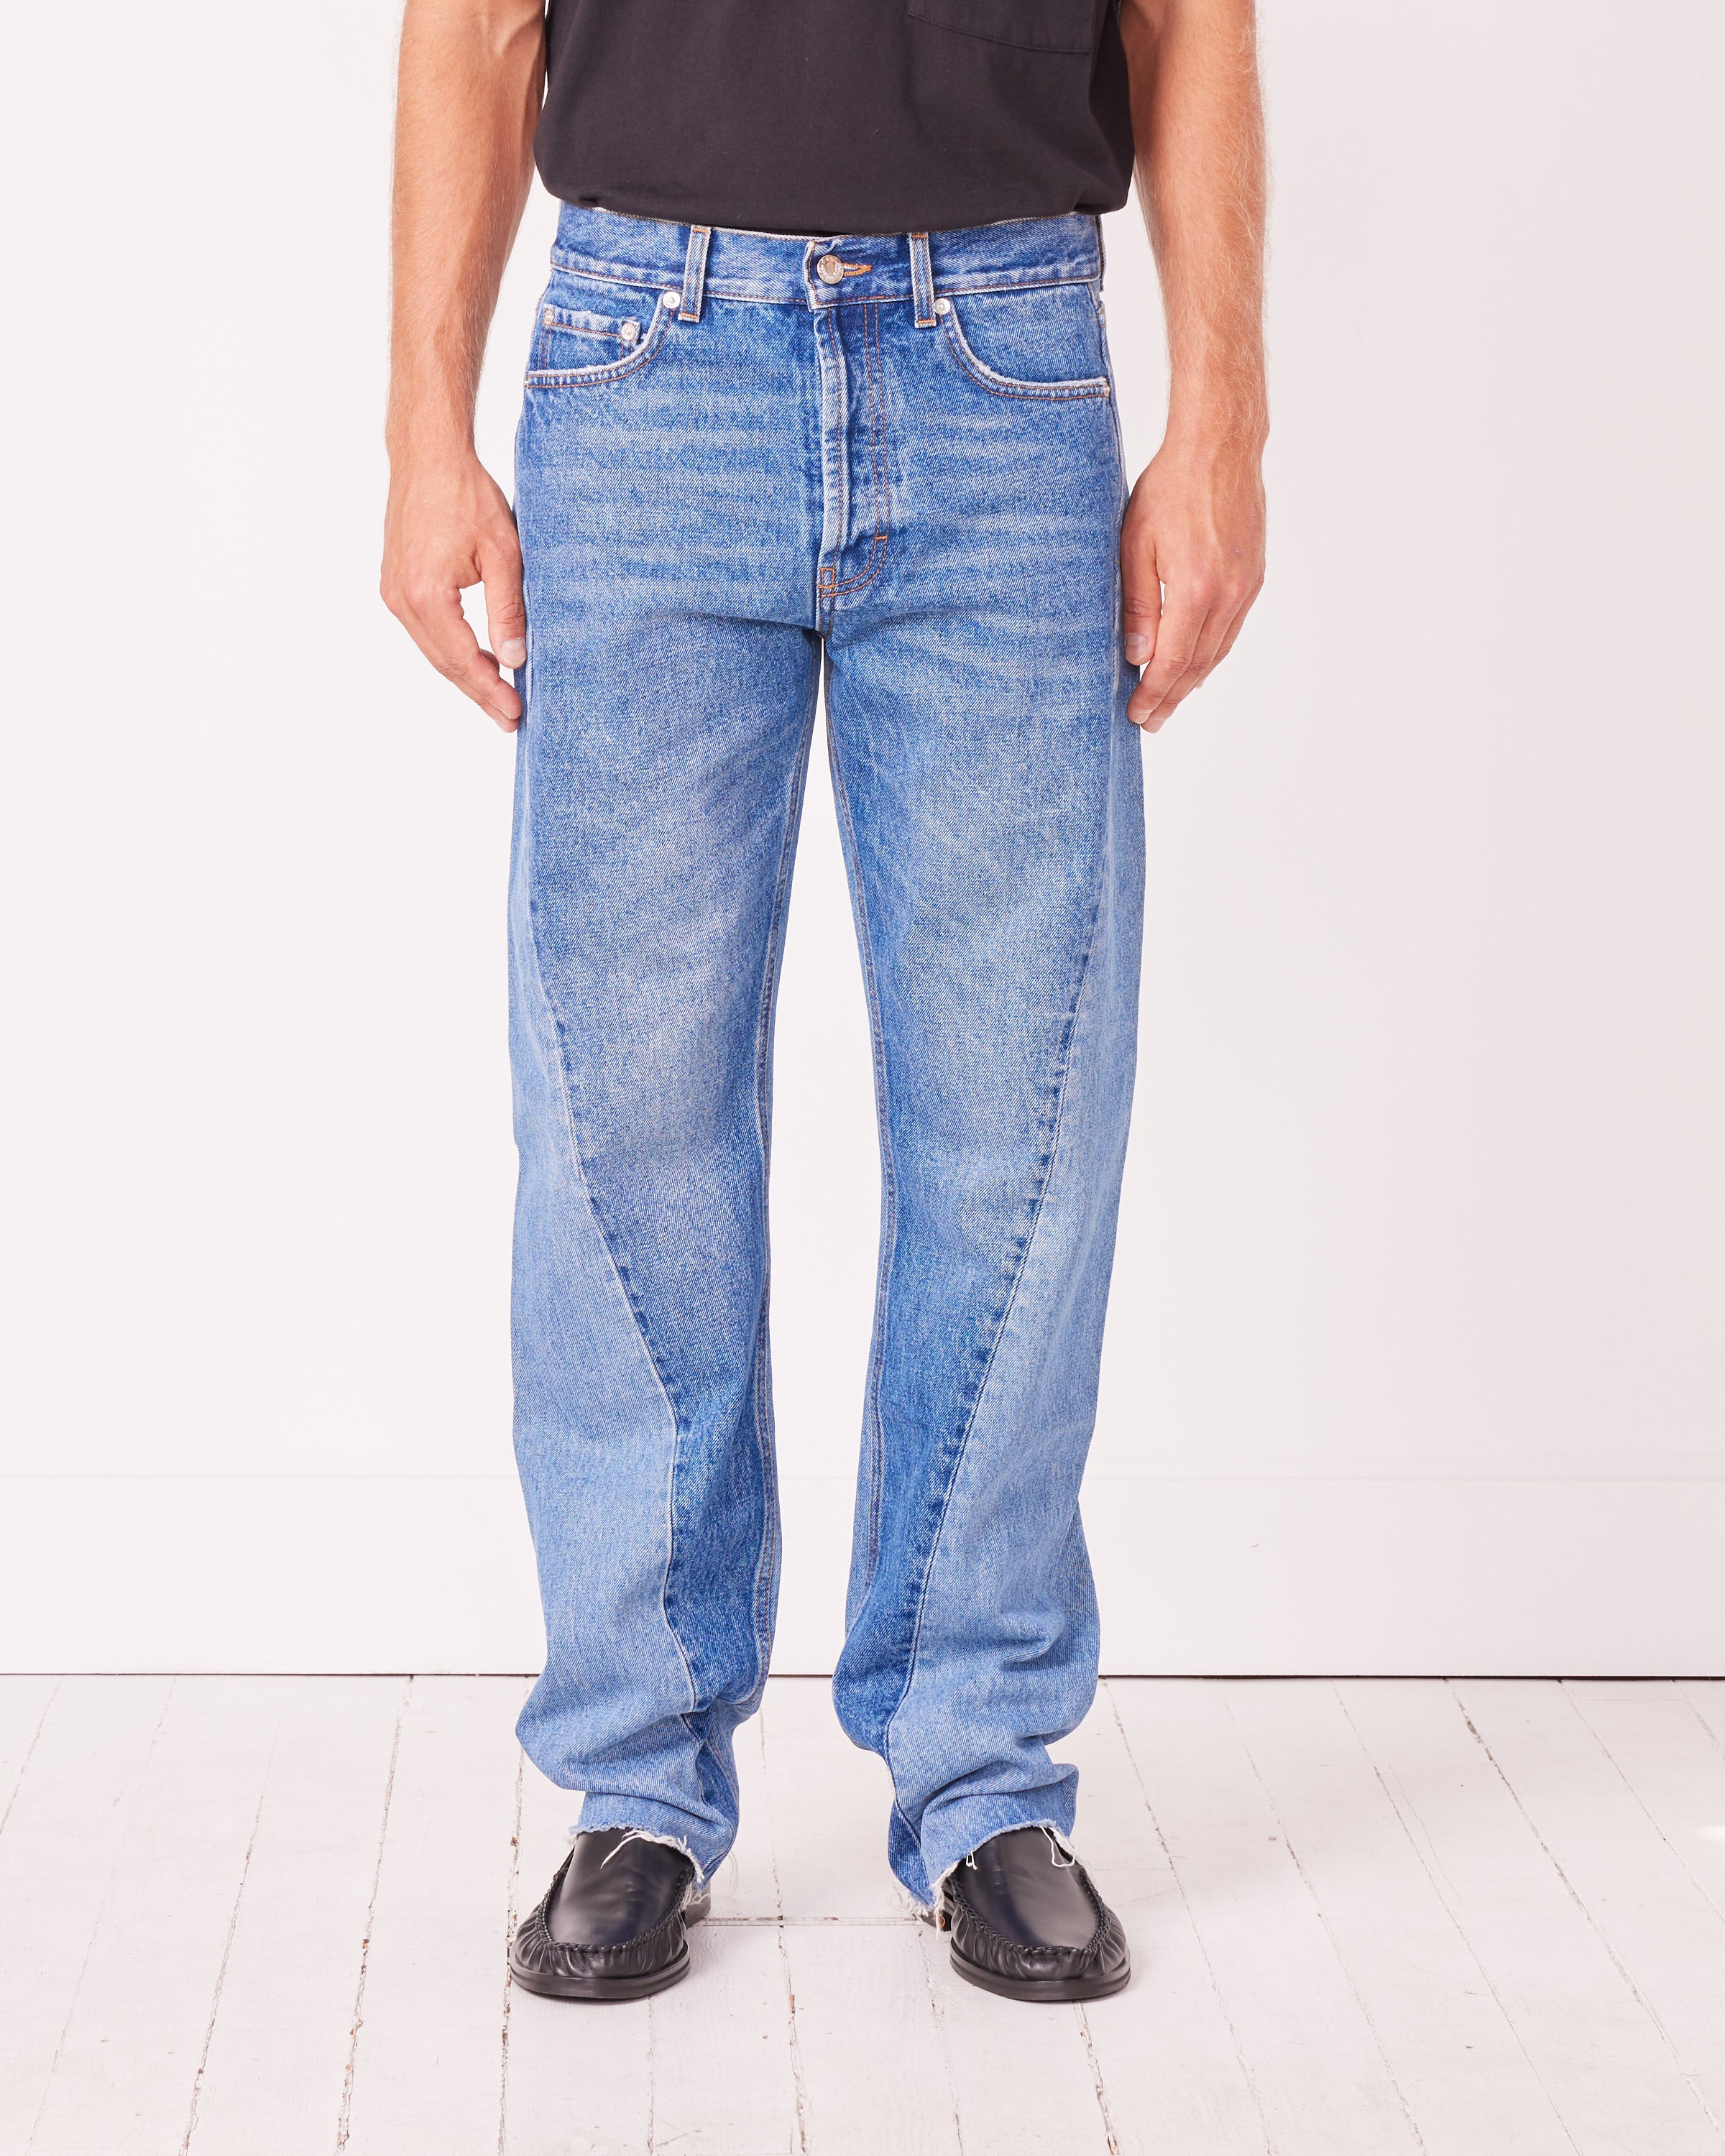 Twisted Cut Jeans – Mohawk General Store